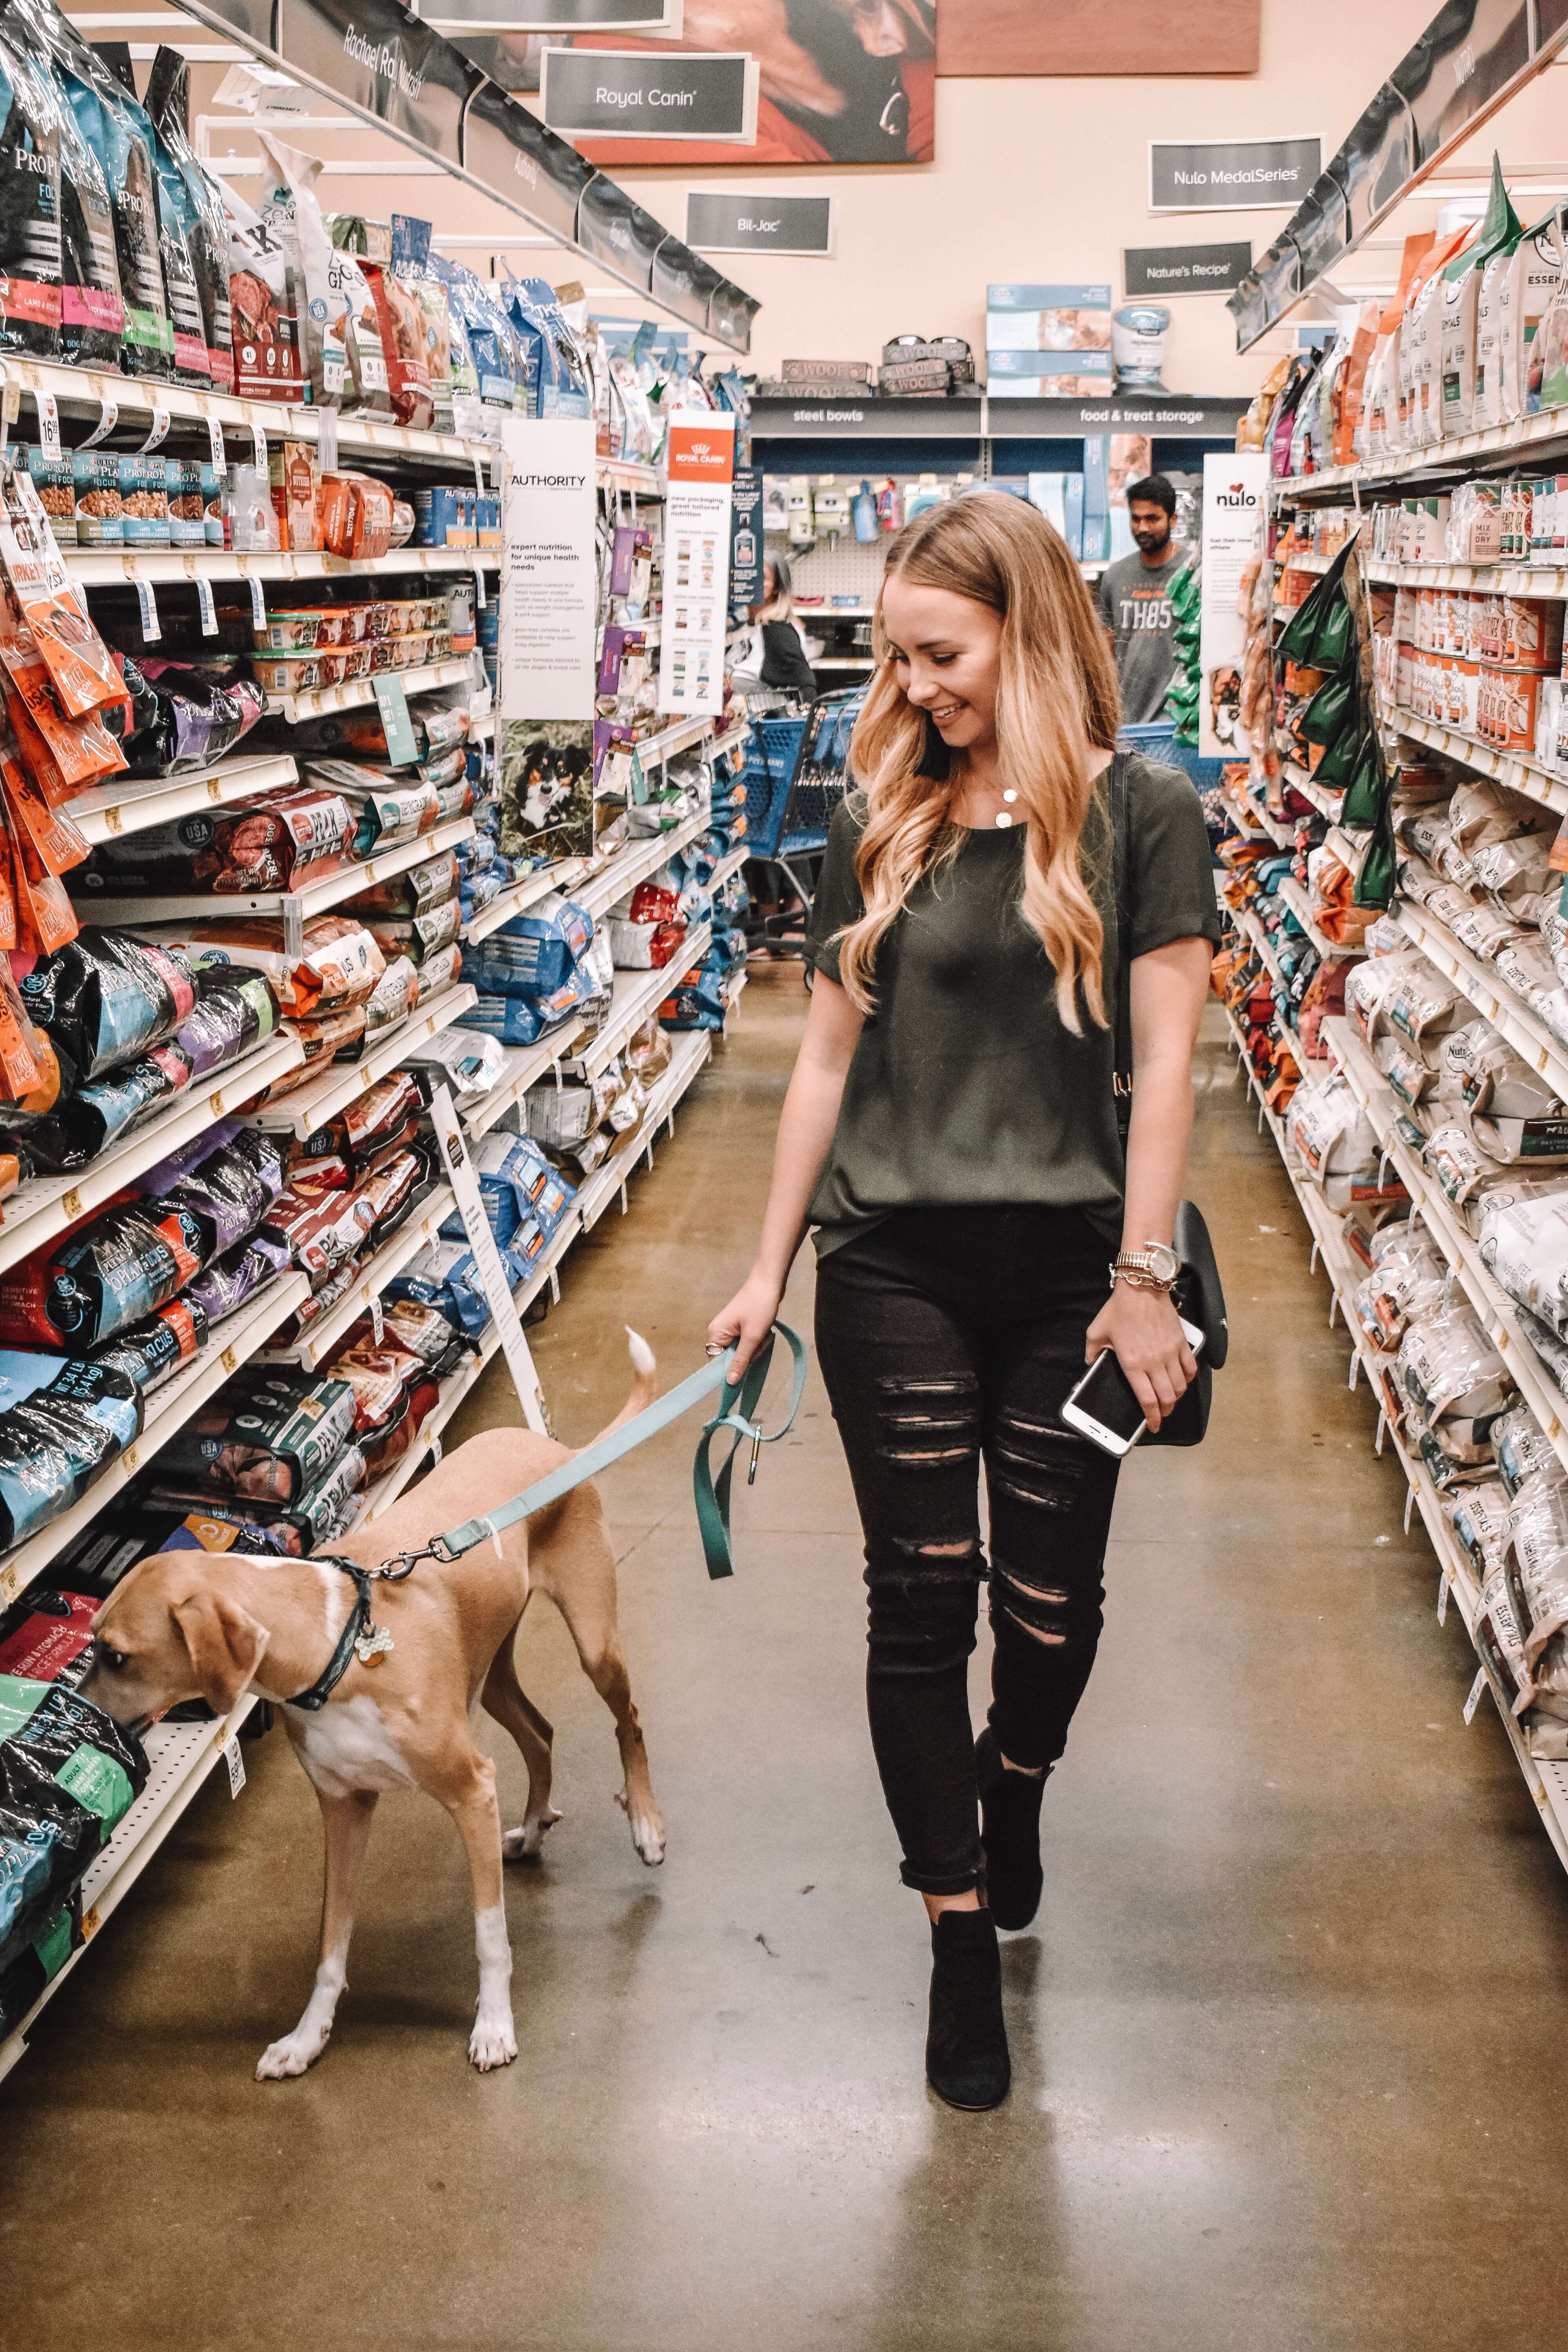 Why I stick to Purina Pro Plan Focus dog food. Quinn has been eating Purina Pro Plan her whole life, and we love shopping for her food at Petsmart. My experience at Petsmart and why we choose Purina. The Blonder Life